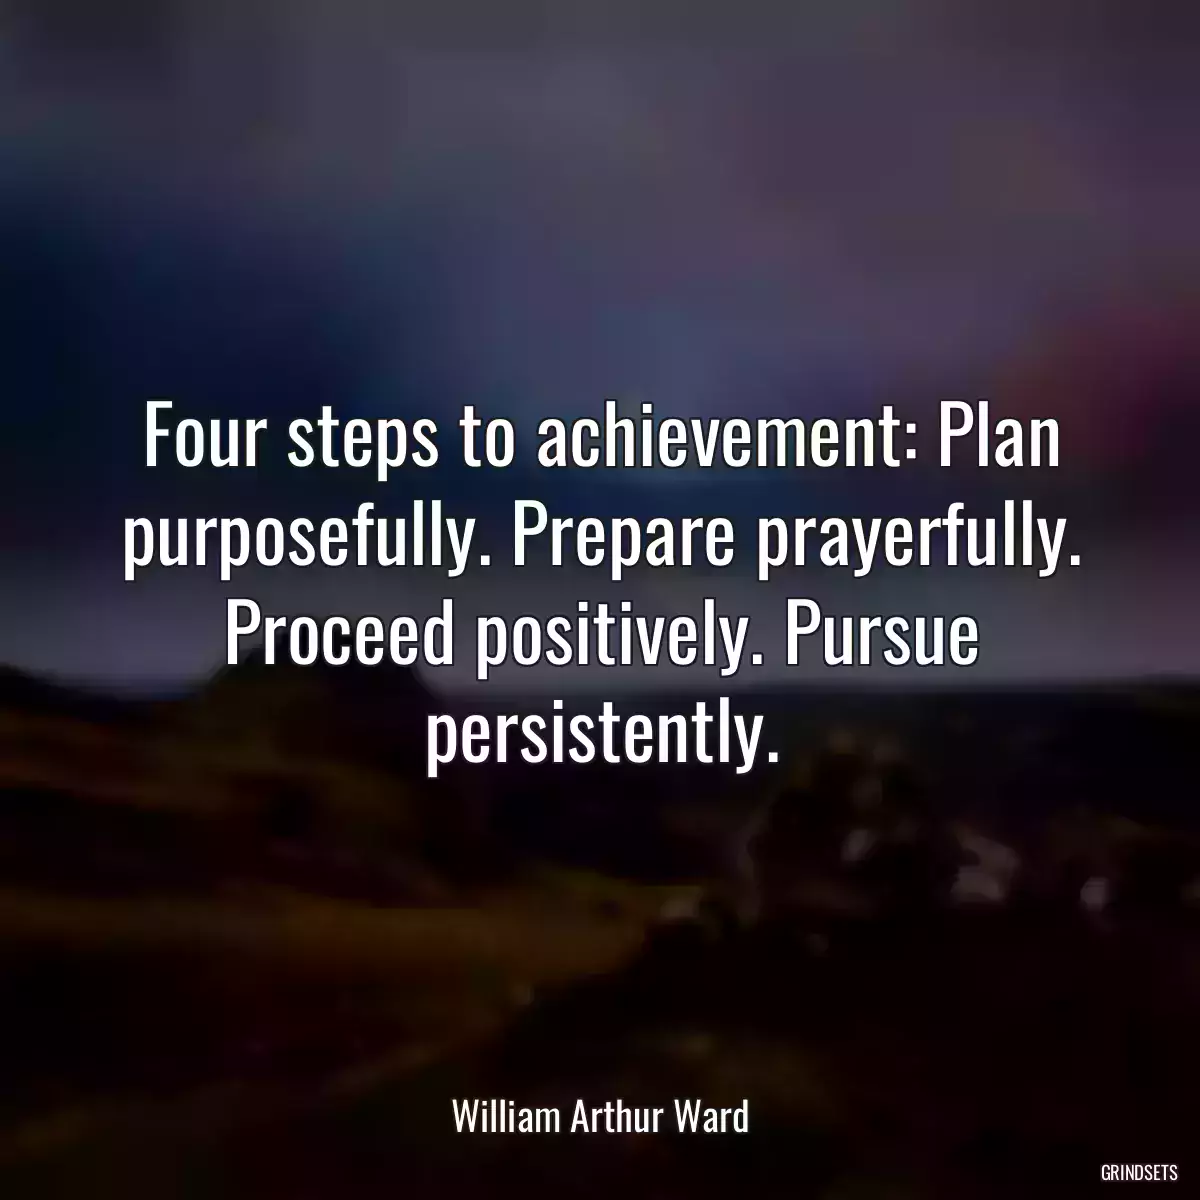 Four steps to achievement: Plan purposefully. Prepare prayerfully. Proceed positively. Pursue persistently.